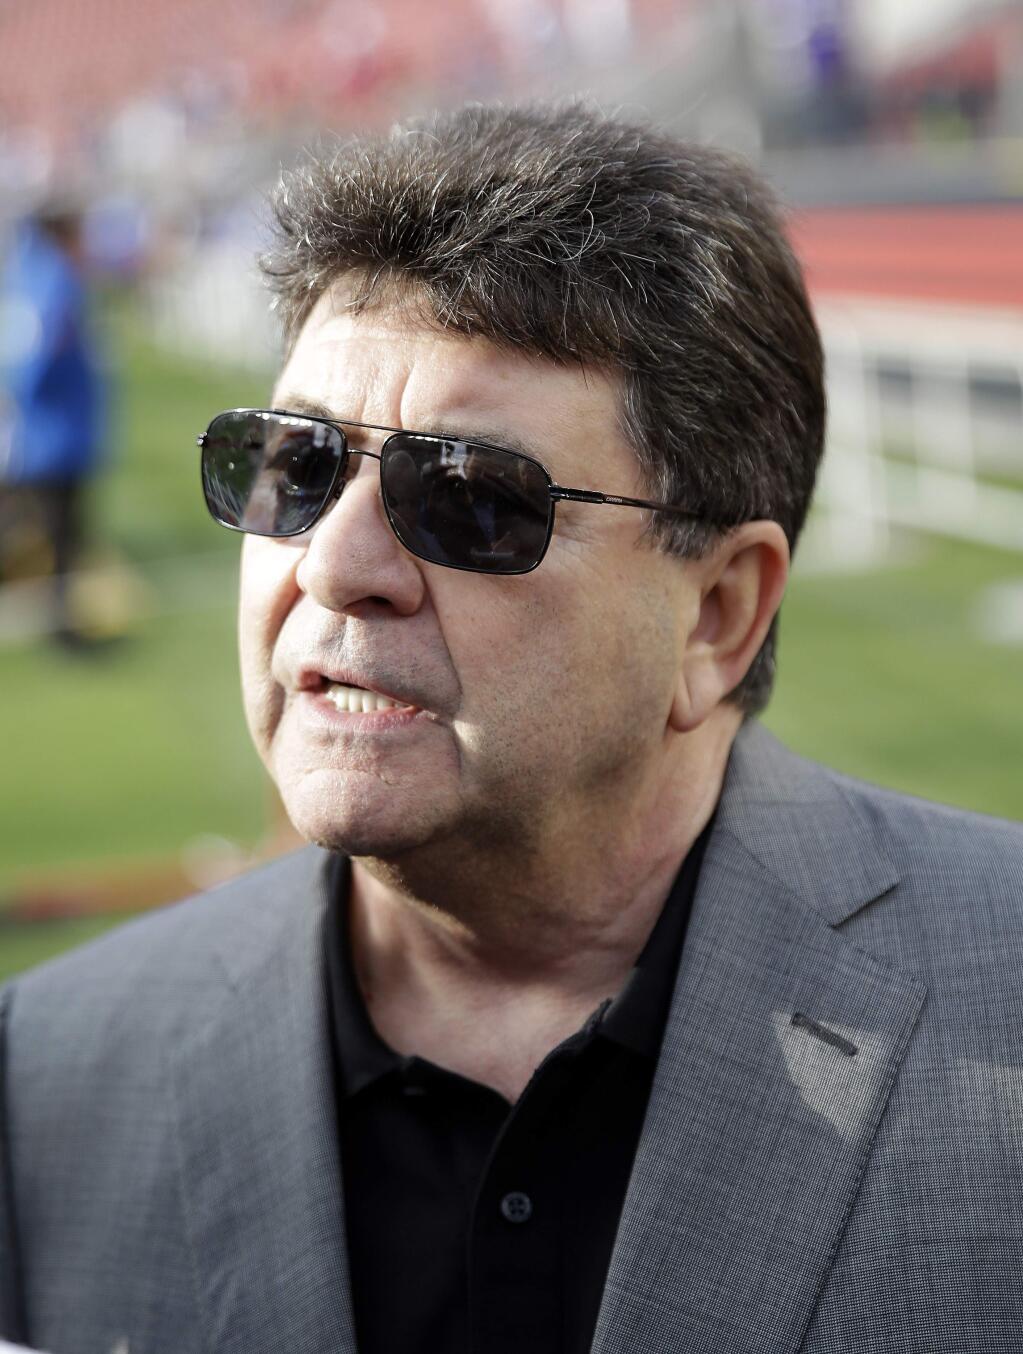 Former San Francisco 49ers owner Eddie DeBartolo Jr., right, speaks to reporters before an NFL football game between the San Francisco 49ers and the Minnesota Vikings in Santa Clara, Calif., Monday, Sept. 14, 2015. (AP Photo/Marcio Jose Sanchez)